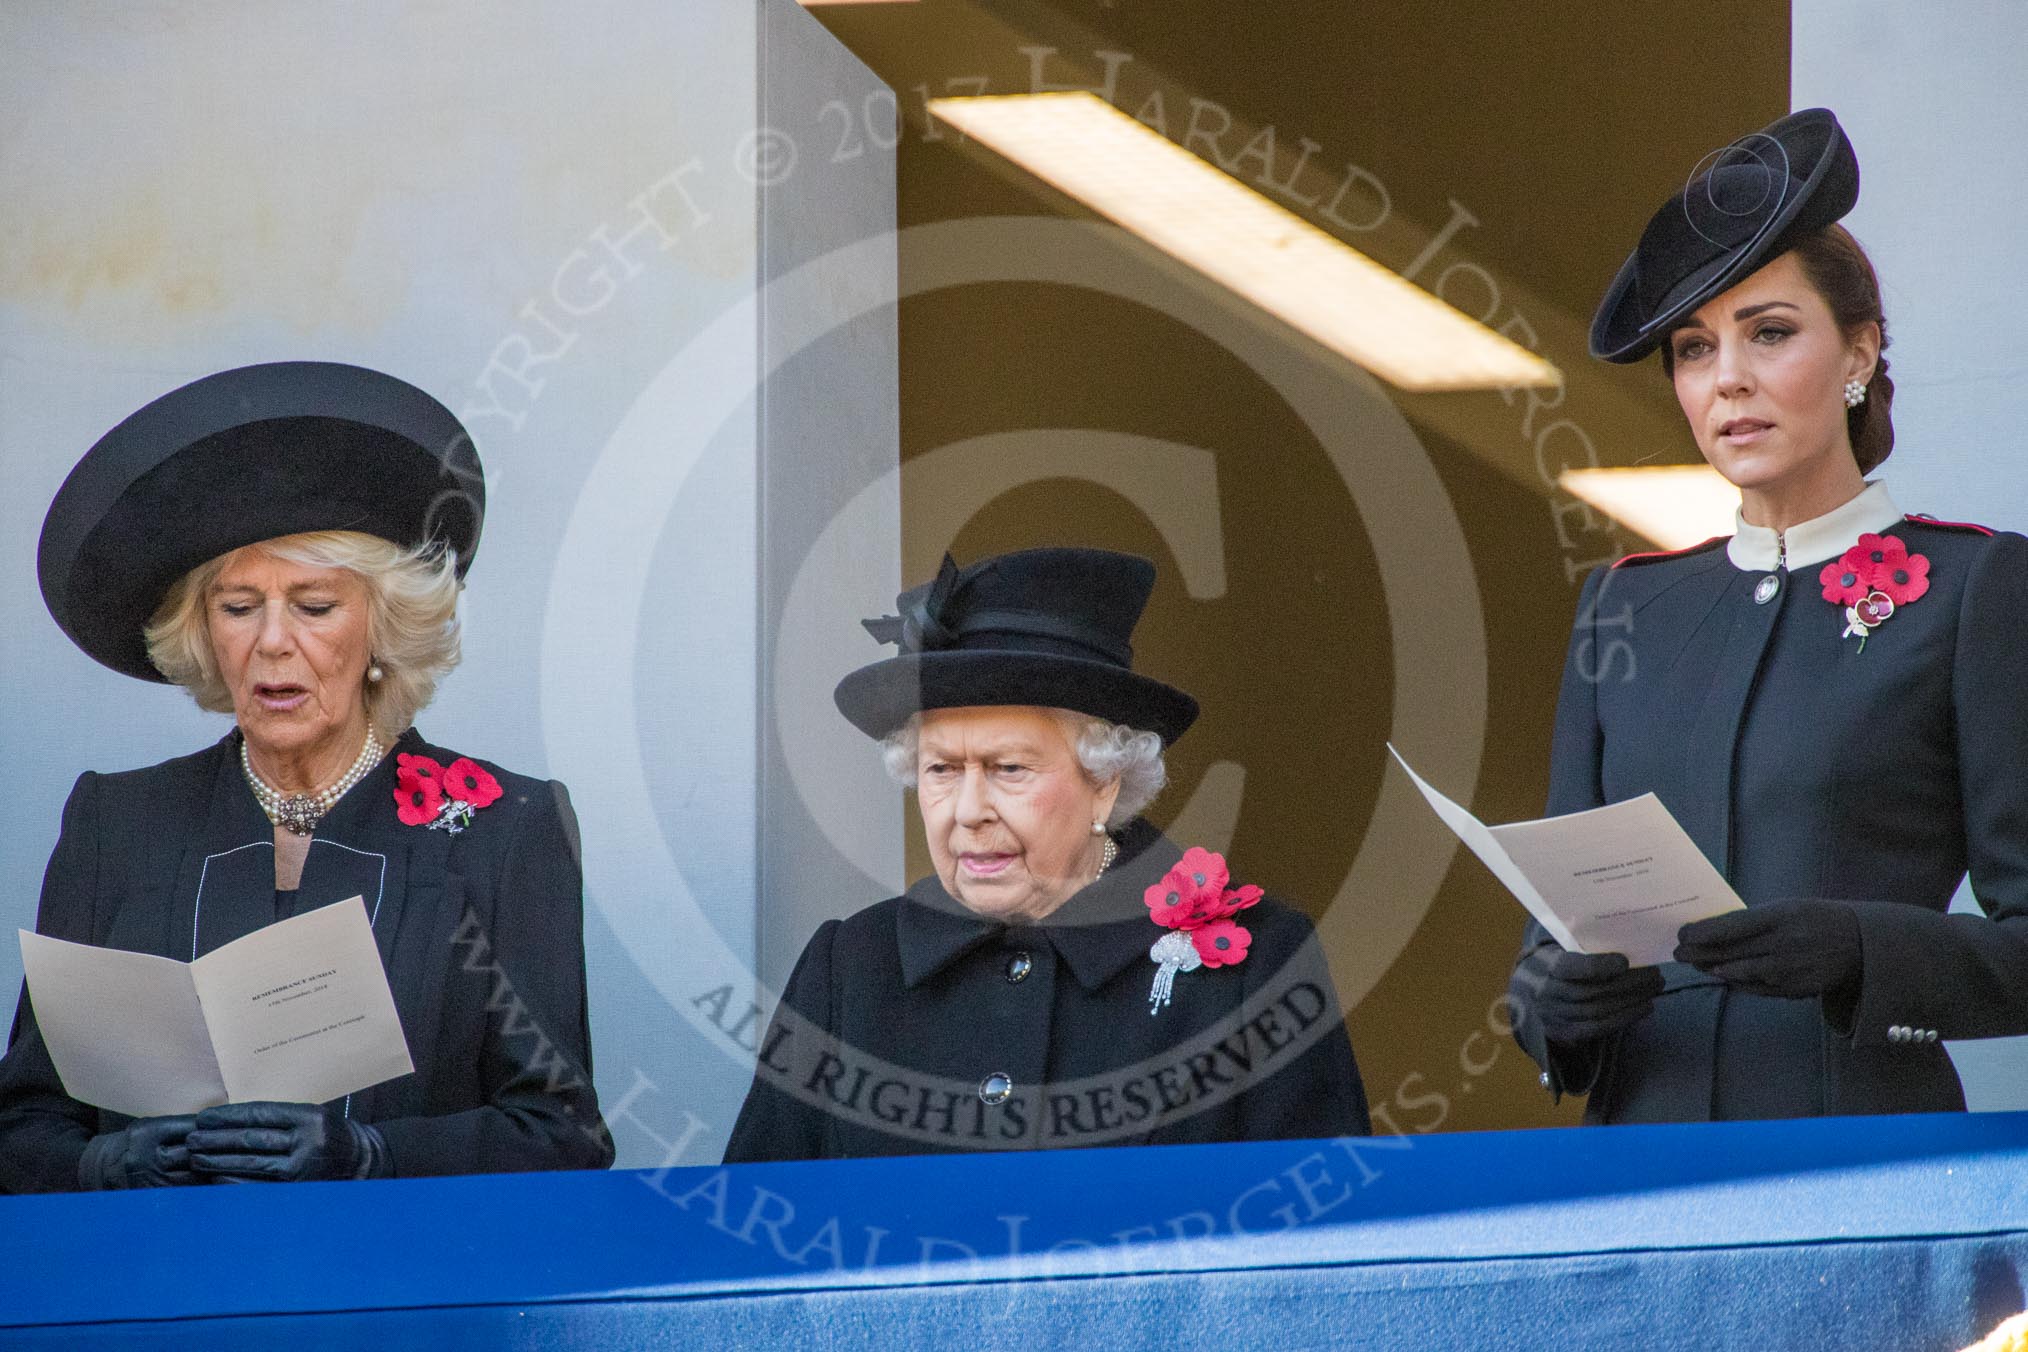 HRH The Duchess of Cornwall (Camilla), Her Majesty The Queen, and HRH The Duchess of Cambridge (Kate), singing, on the balcony of the Foreign and Commonwealth Office during the Remembrance Sunday Cenotaph Ceremony 2018 at Horse Guards Parade, Westminster, London, 11 November 2018, 11:18.